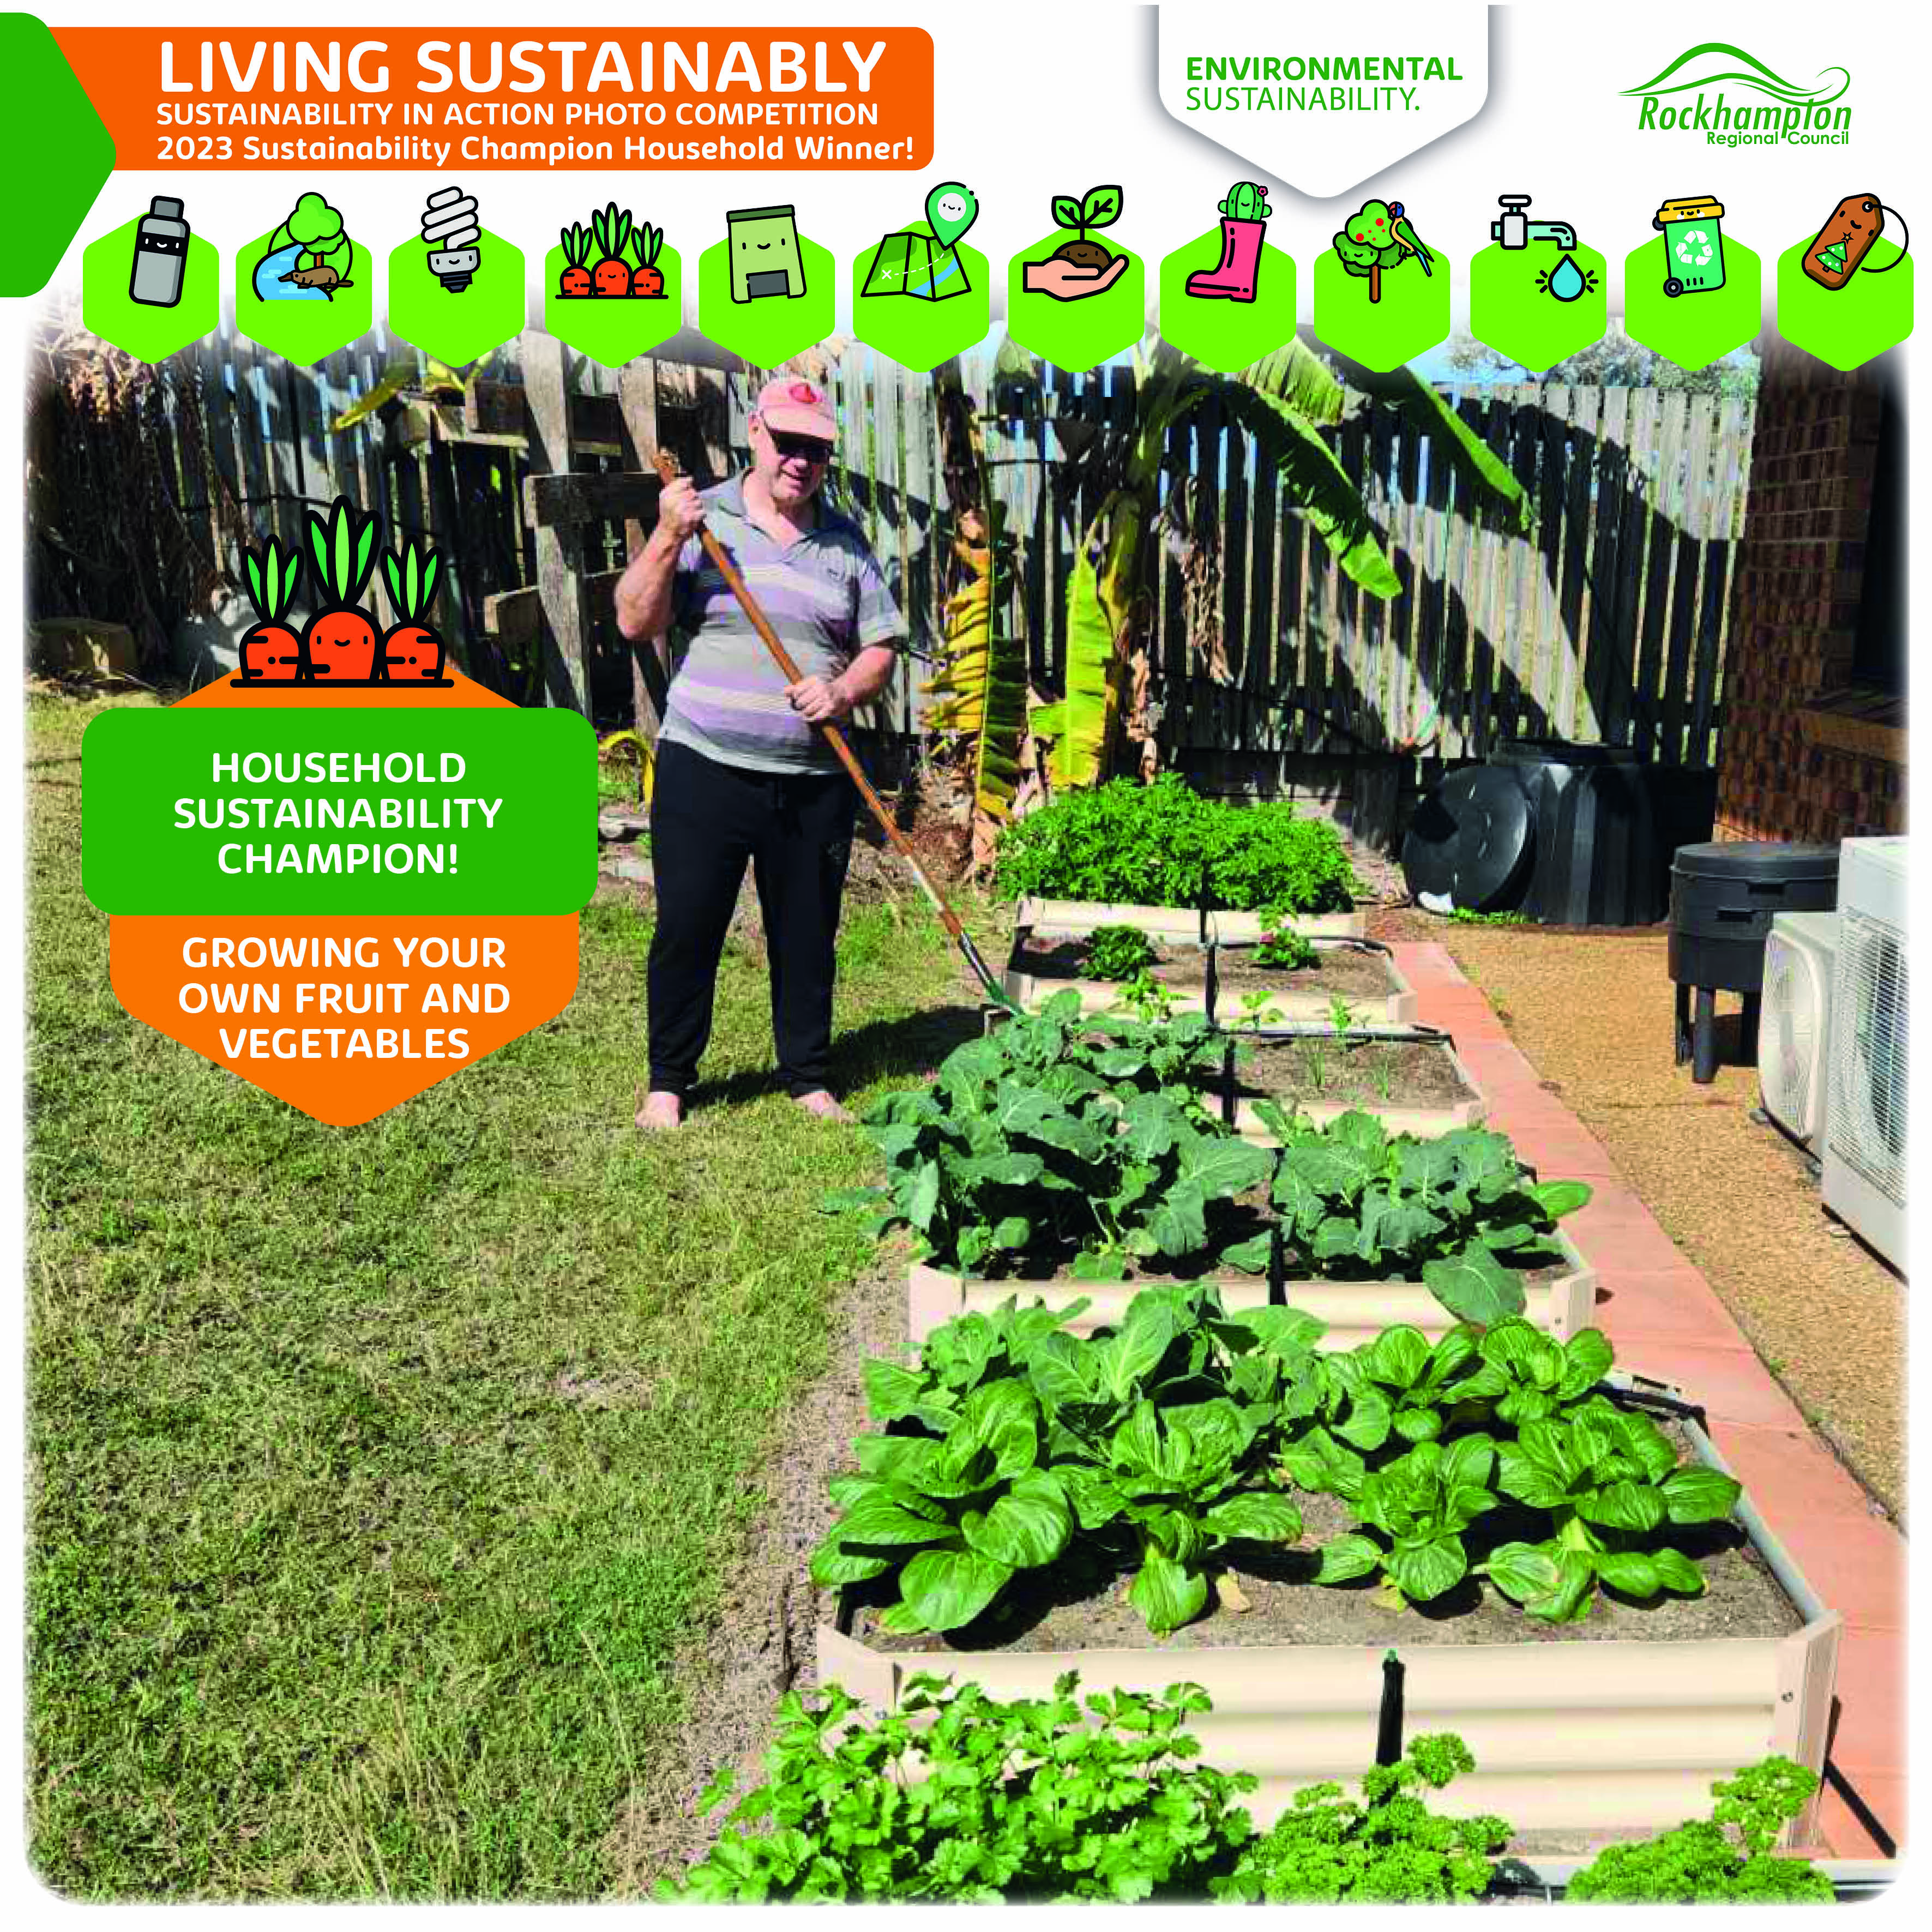 2023-HOUSEHOLD-Sustainability-in-Action-Photo-Comp-Lloyd-Brown